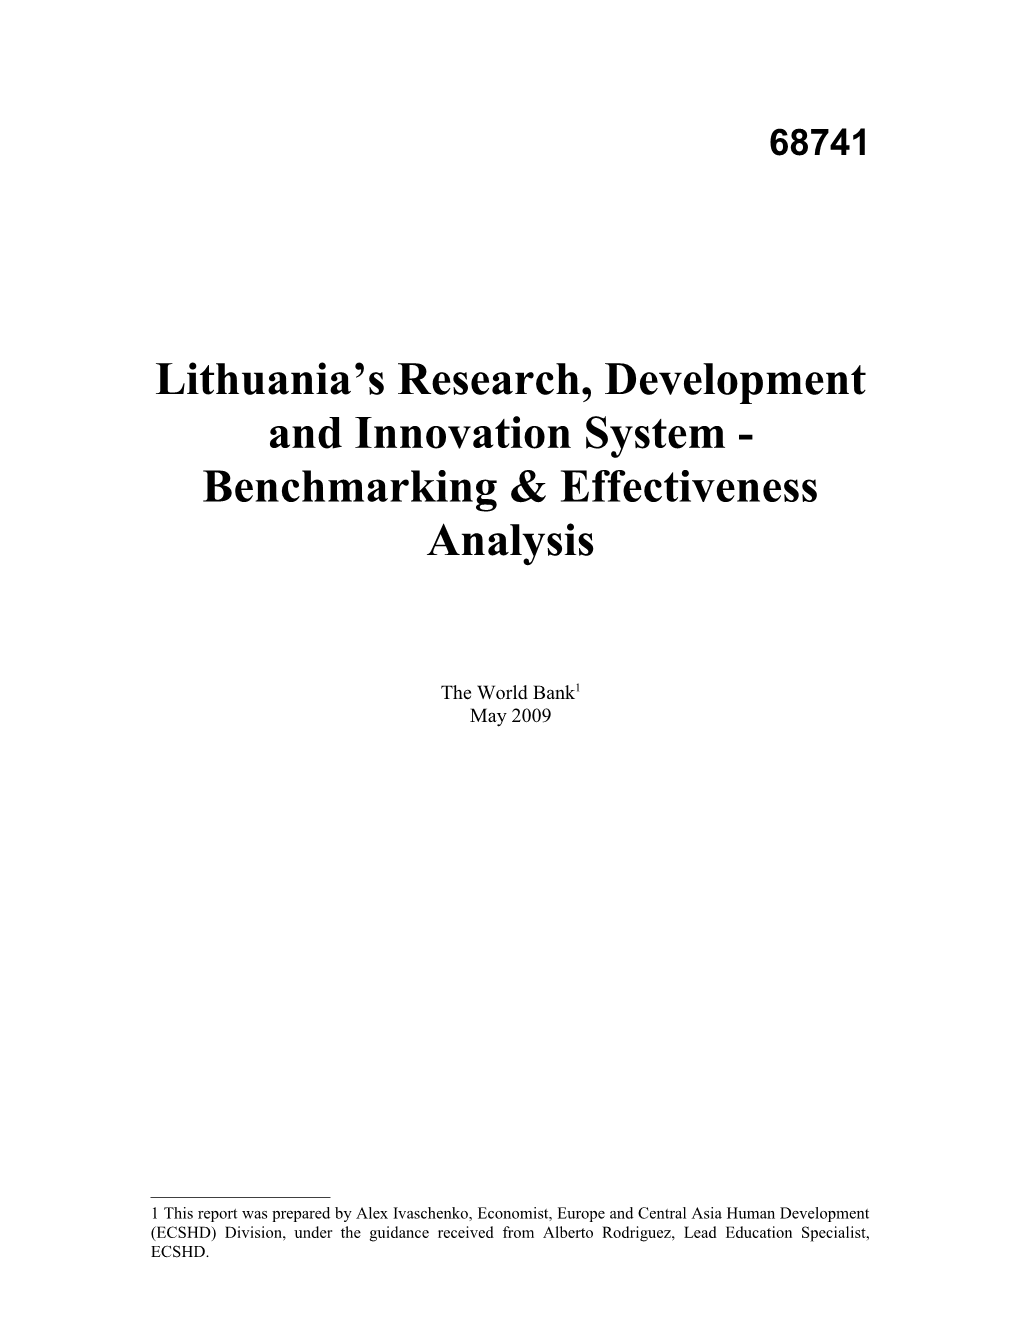 Lithuanian Public R&D Investment Benchmarking & Effectiveness Analysis